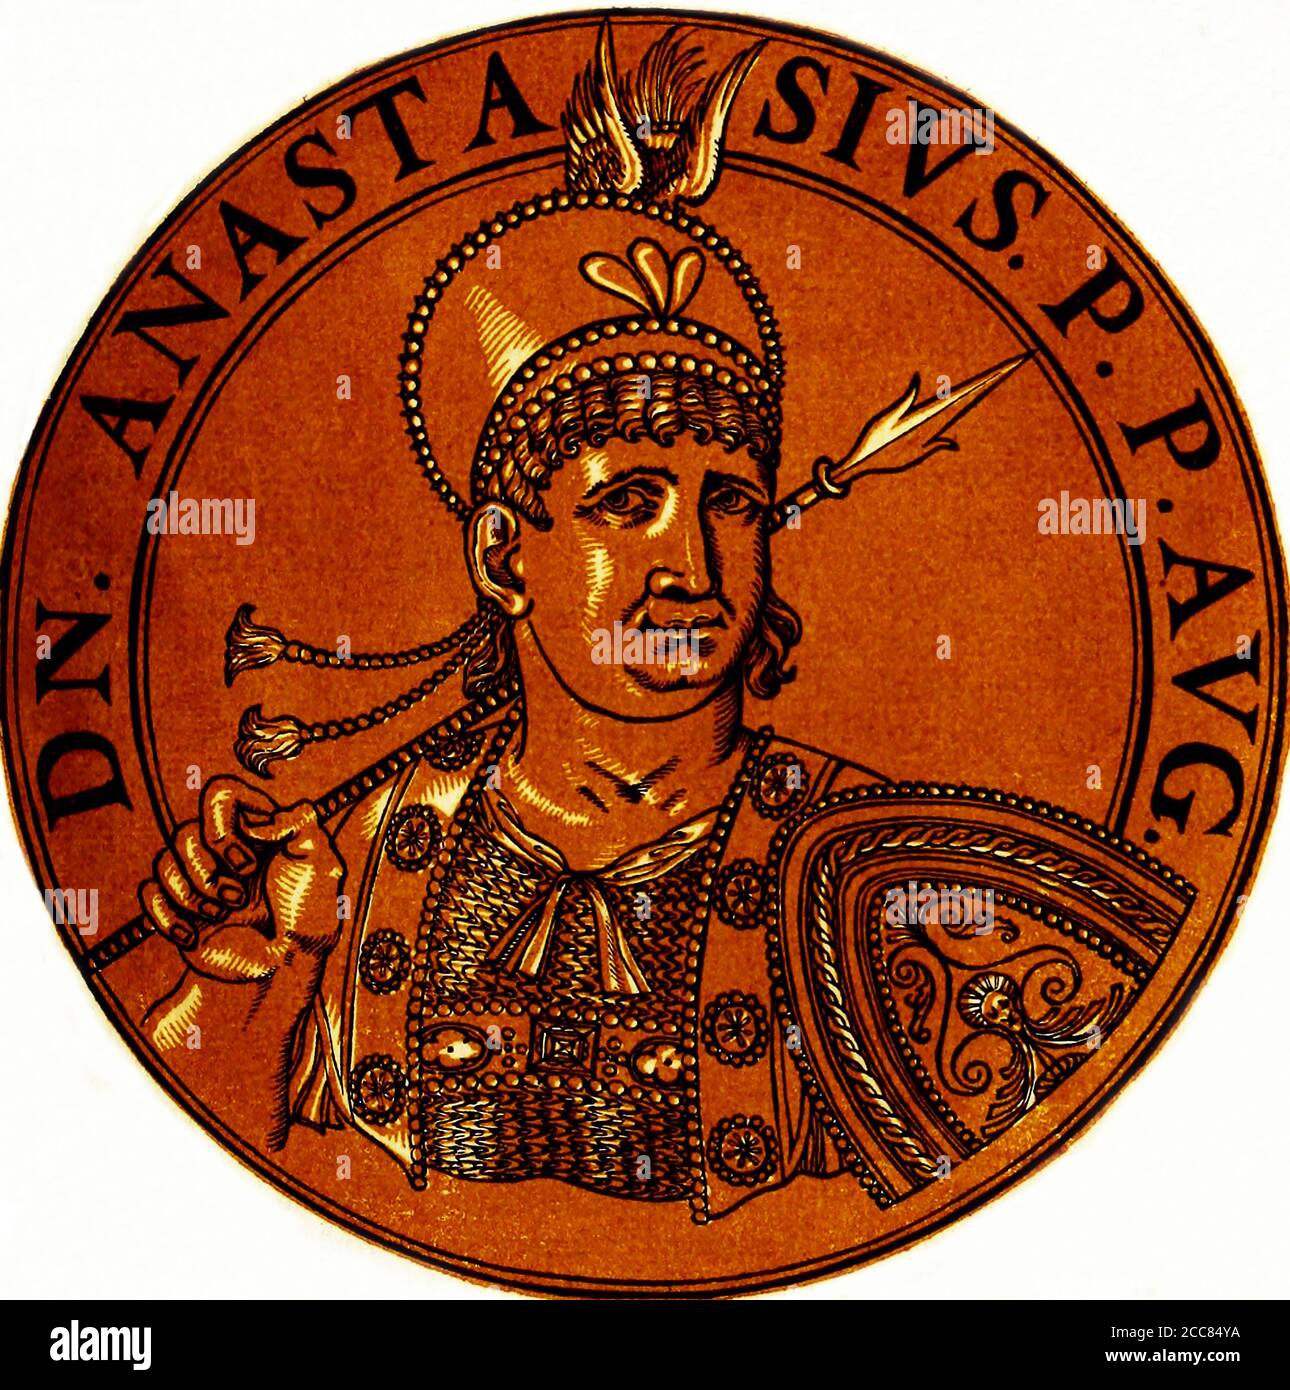 Turkey / Byzantium: Anastasius II (-719), Byzantine emperor, from the book Icones imperatorvm romanorvm (Icons of Roman Emperors), Antwerp, c. 1645. Anastasius II, also known as Anastasios II and originally named Artemius, was a bureaucrat and imperial secretary in the Byzantine court. He was proclaimed emperor by the Opsician army after they had overthrown Emperor Philippicus. Changing his name to Anastasius, he took the throne and turned on those who had aided his rise by executing those directly involved in the conspiracy against Philippicus. Stock Photo